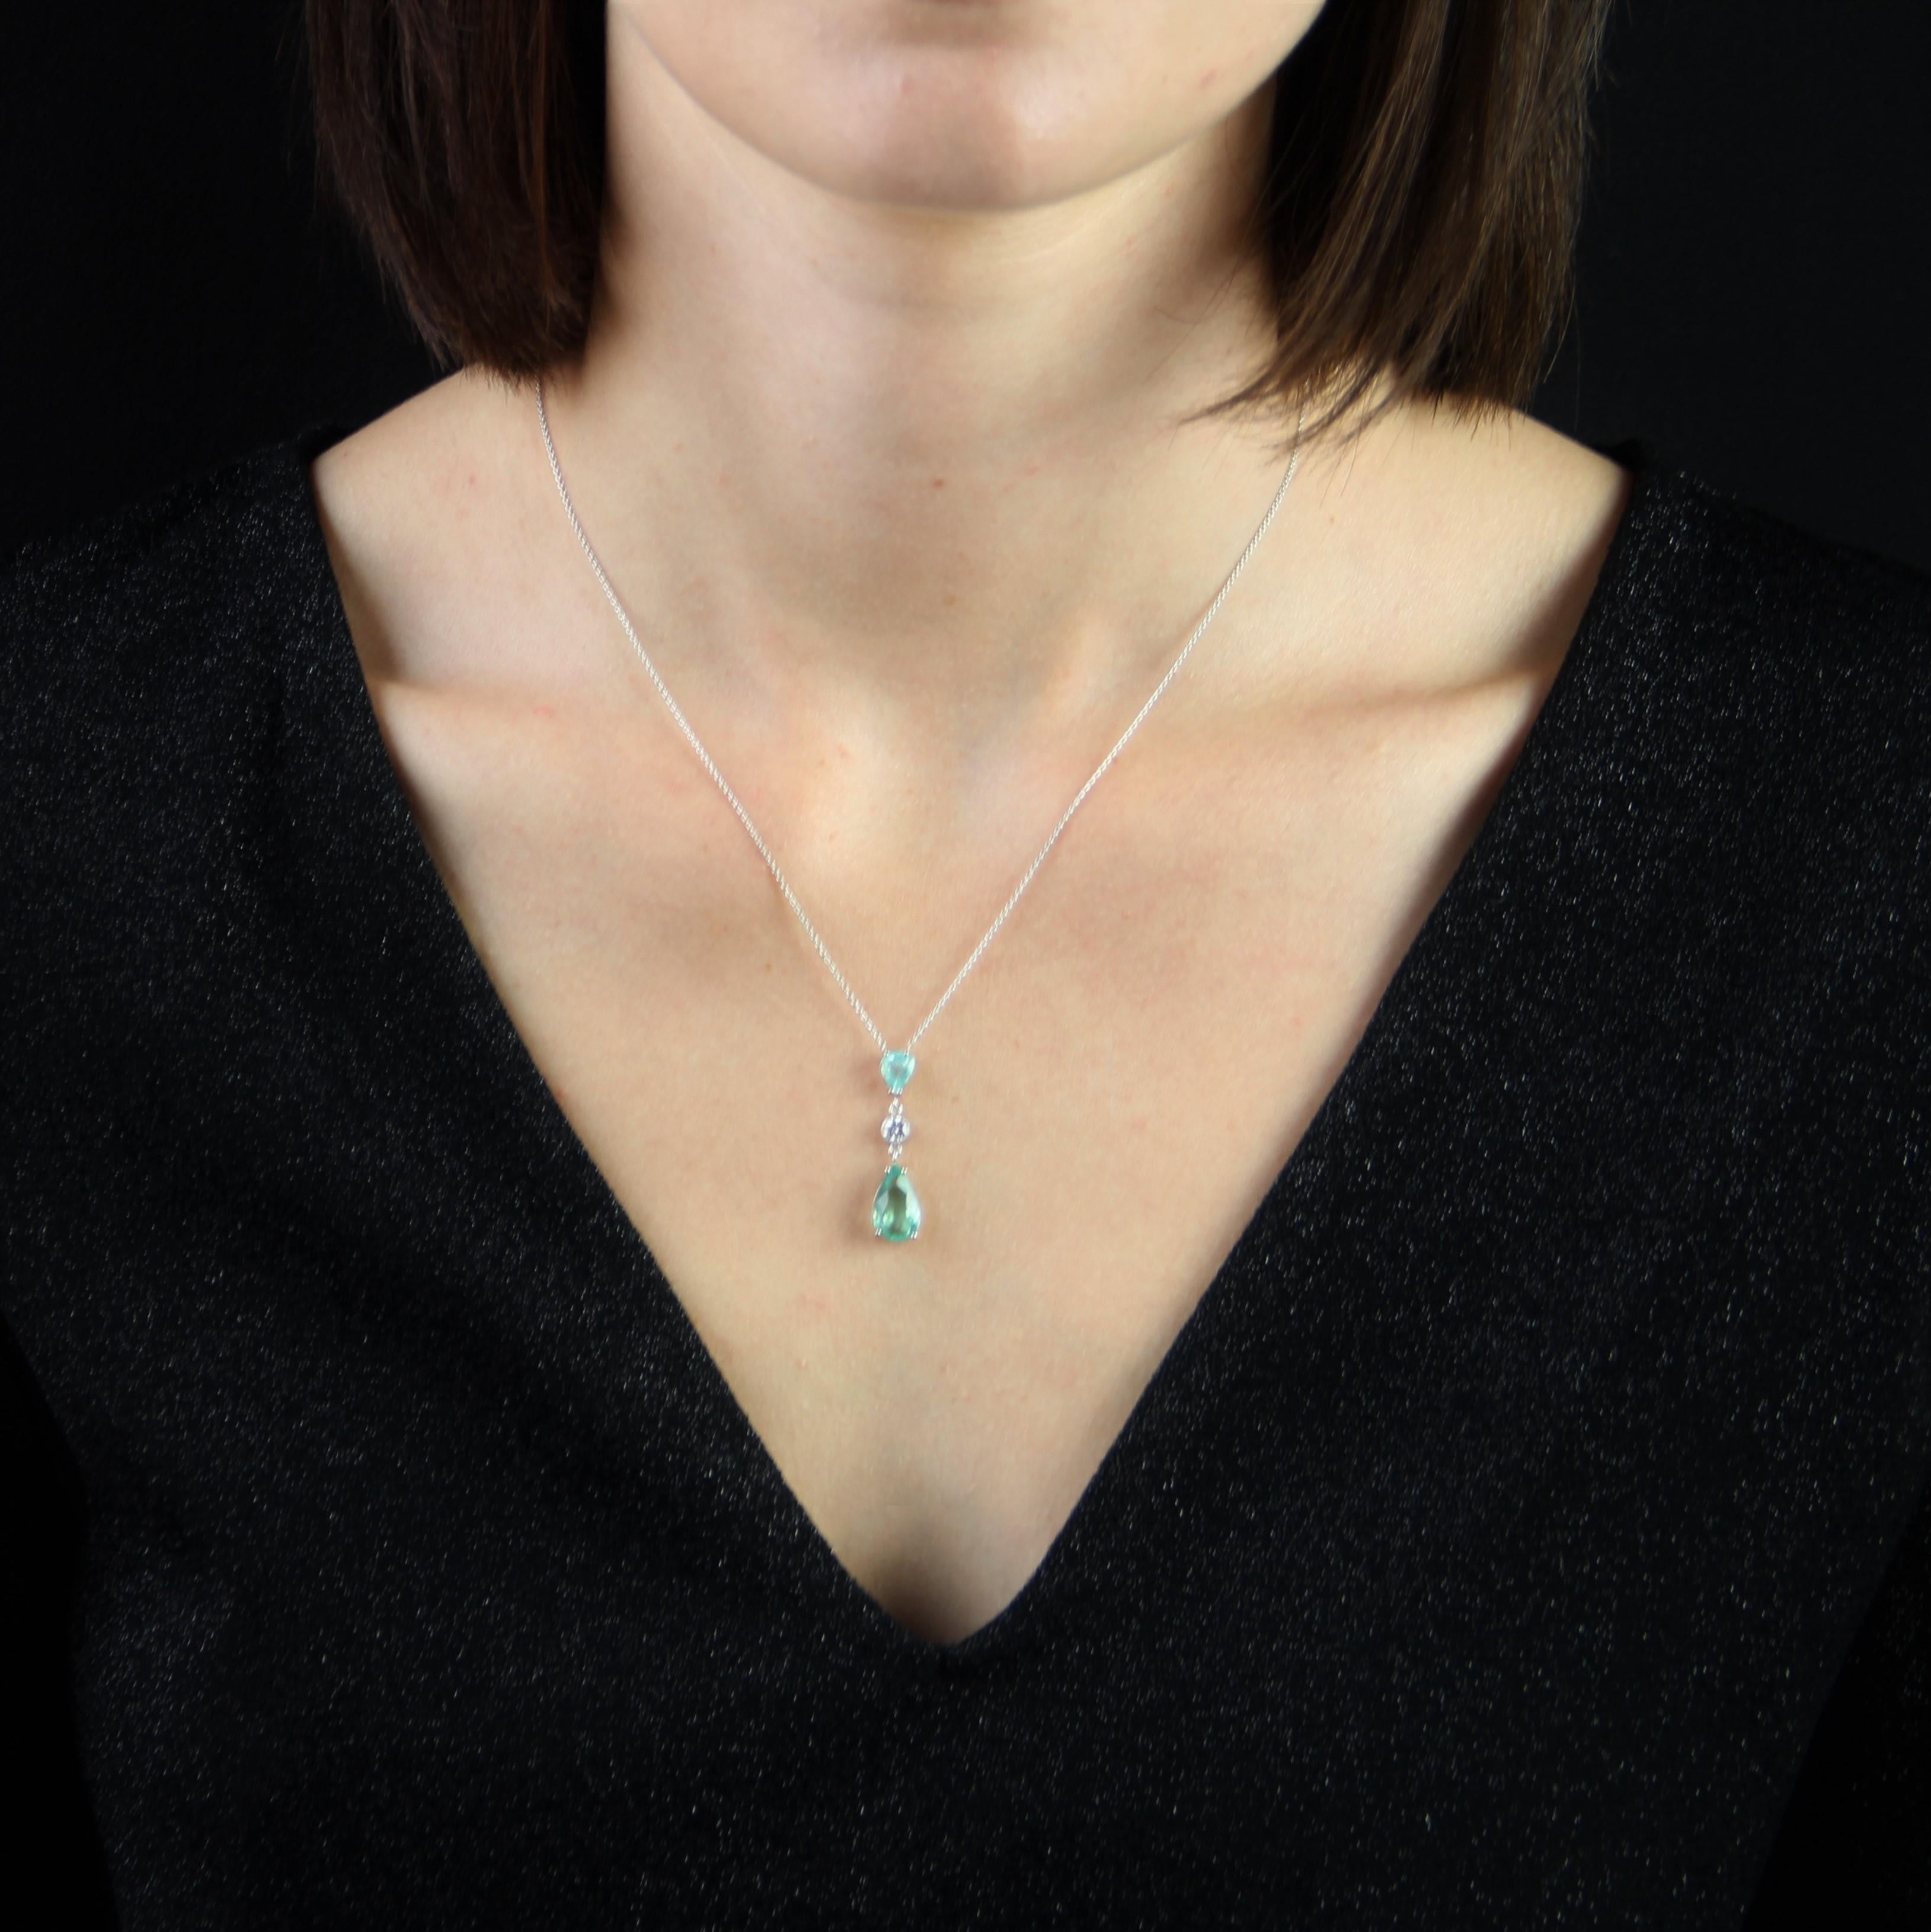  Baume creation - Unique piece.
Pendant in 18 karat white gold.
This modern pendant is made of a thin chain which holds on the front a pendant made of two pear-shaped paraiba tourmalines separated by a modern brilliant-cut diamond closed set in a